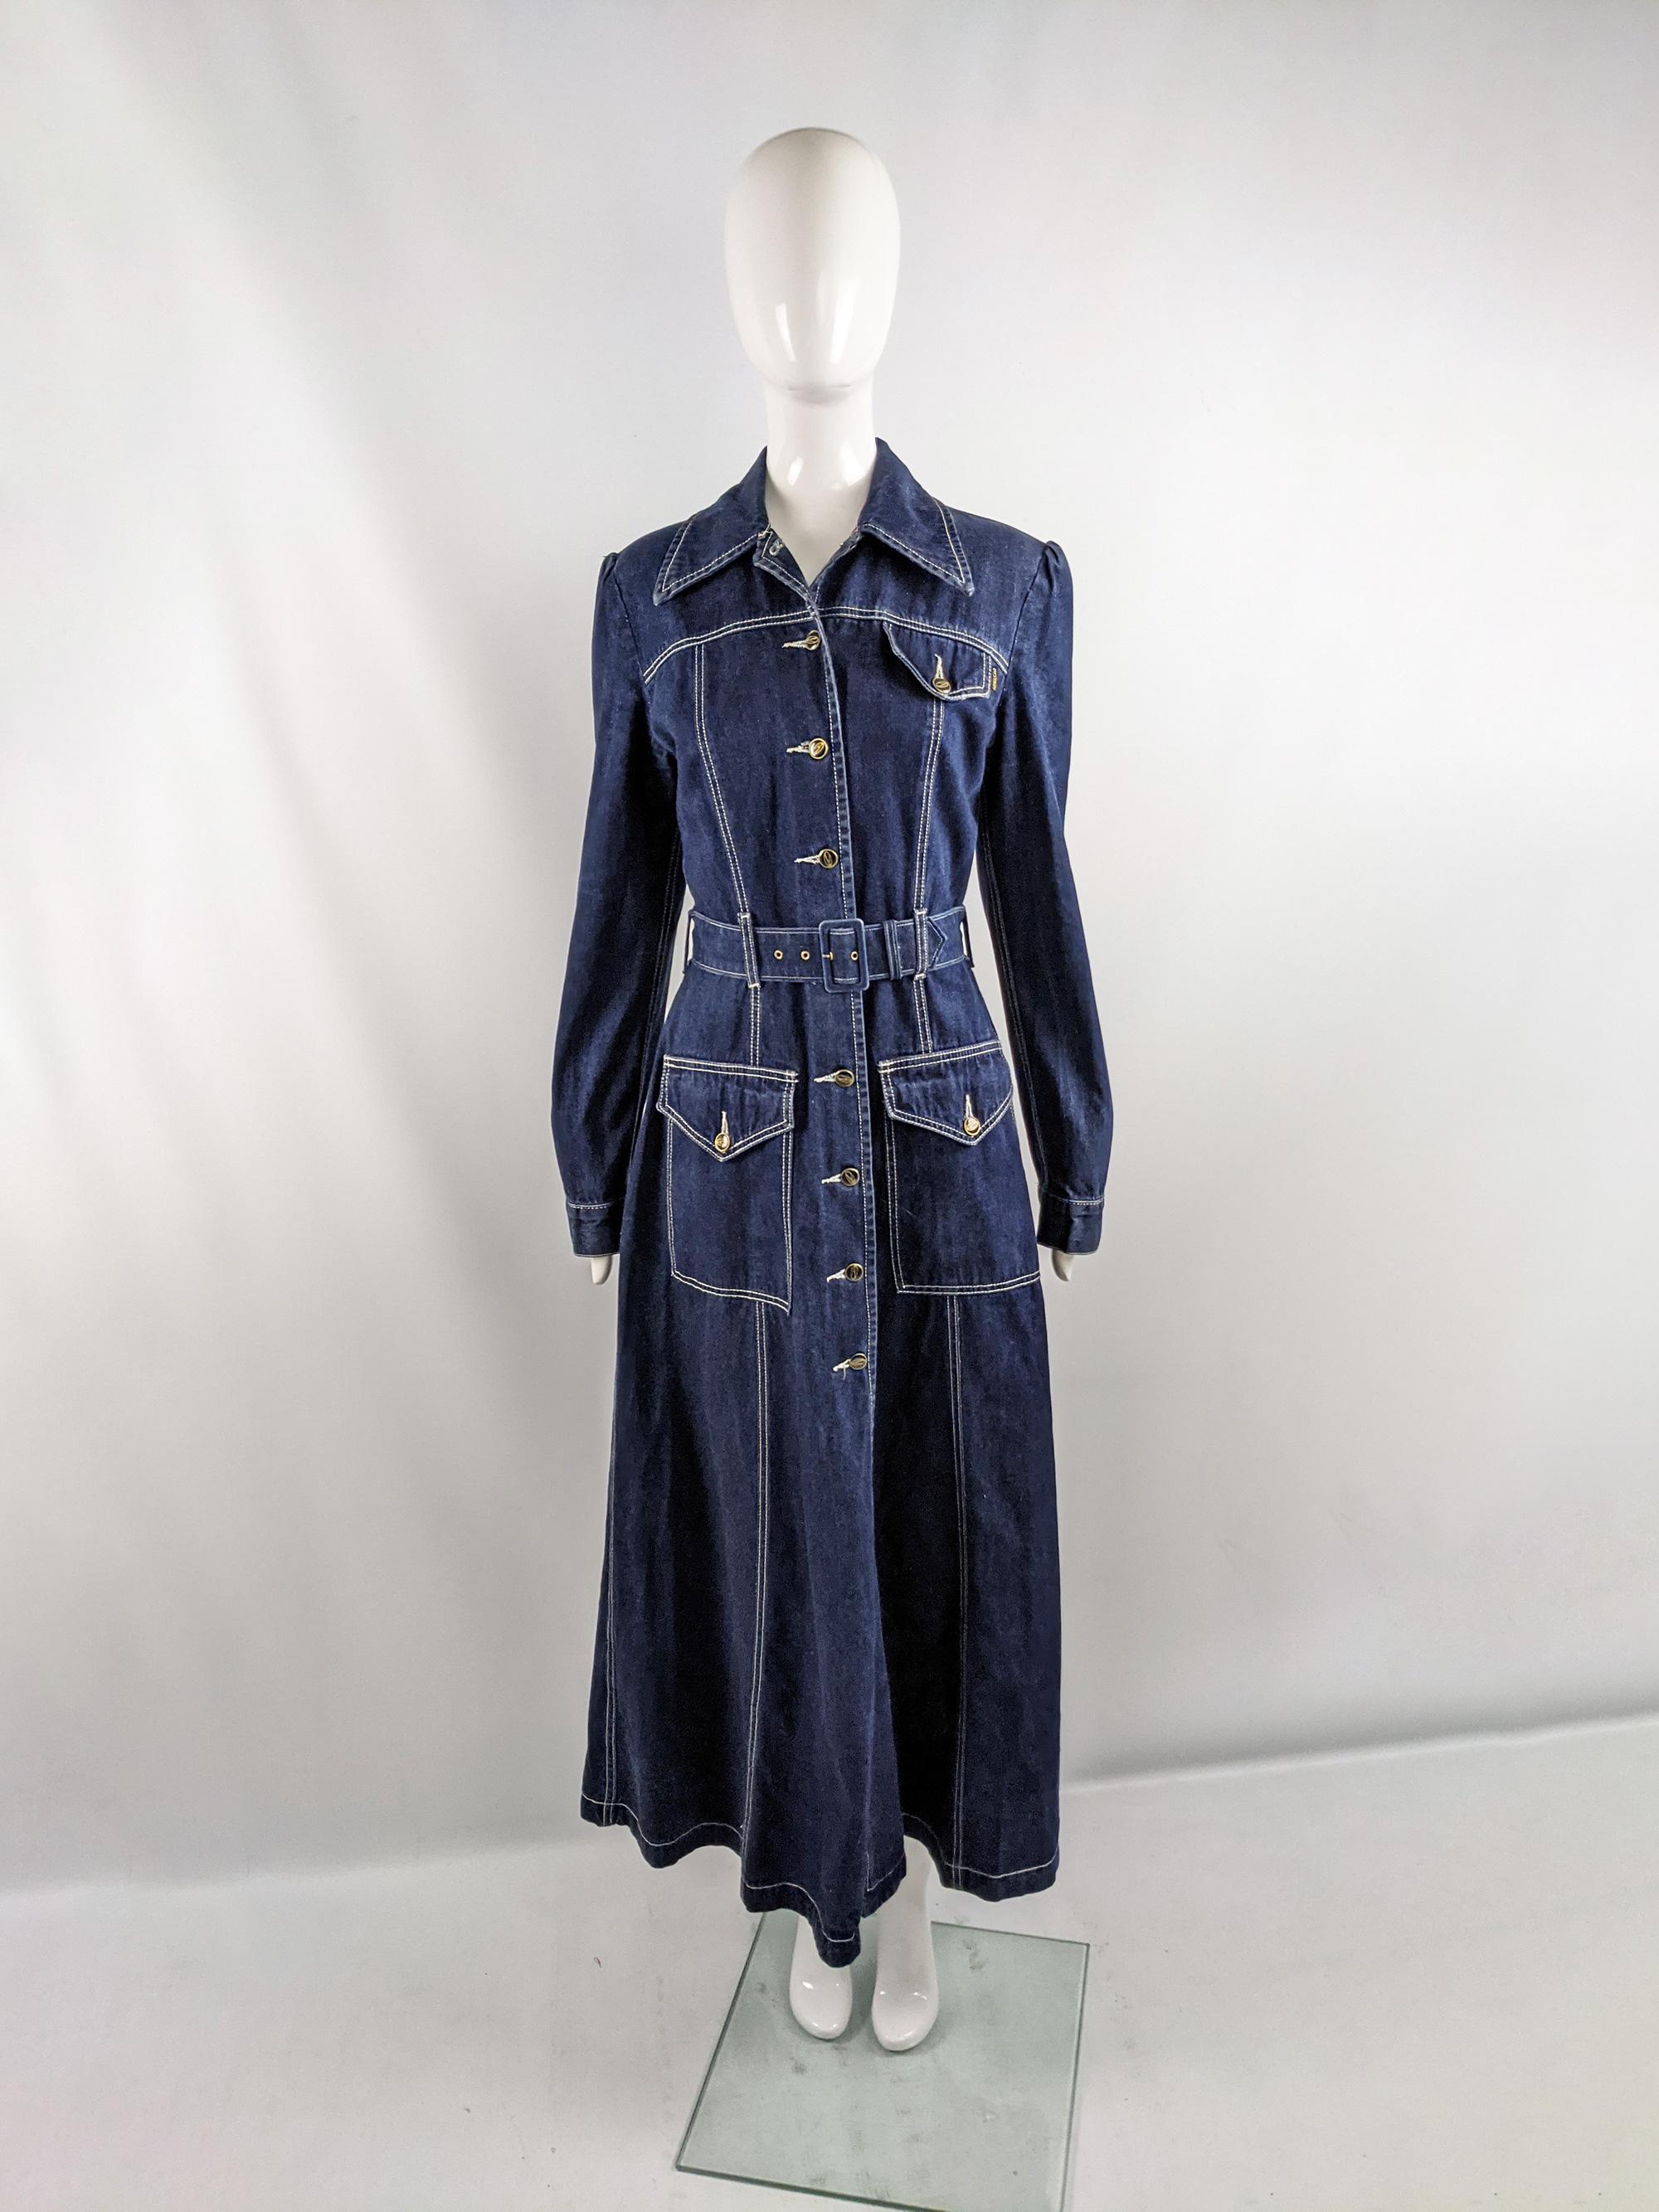 A cool and rare vintage womens maxi coat / dress from the 90s by iconic British designer, John Richmond for his cult label, Destroy. In a blue denim with a matching belt, Richmond's anarchy logo on buttons down the front and a wide, spread collar.